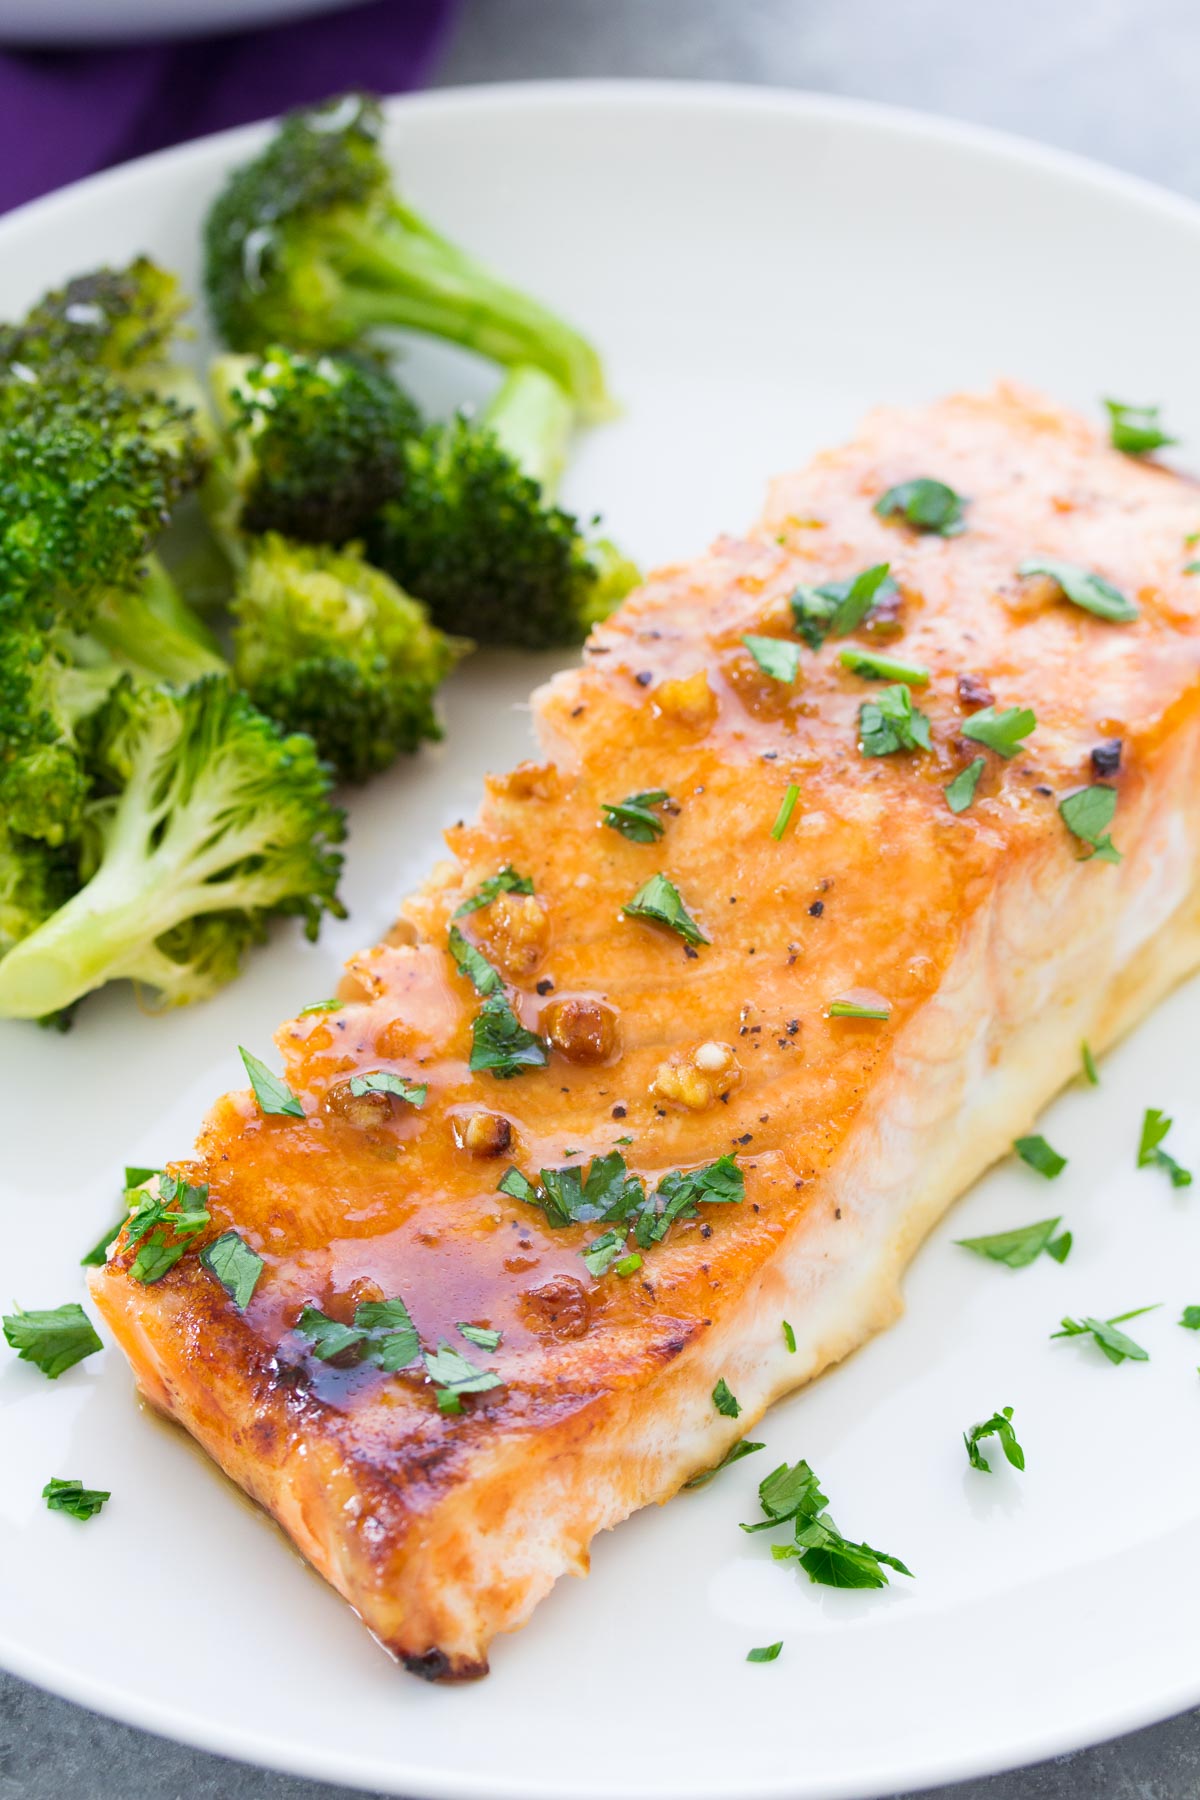 baked salmon served with broccoli